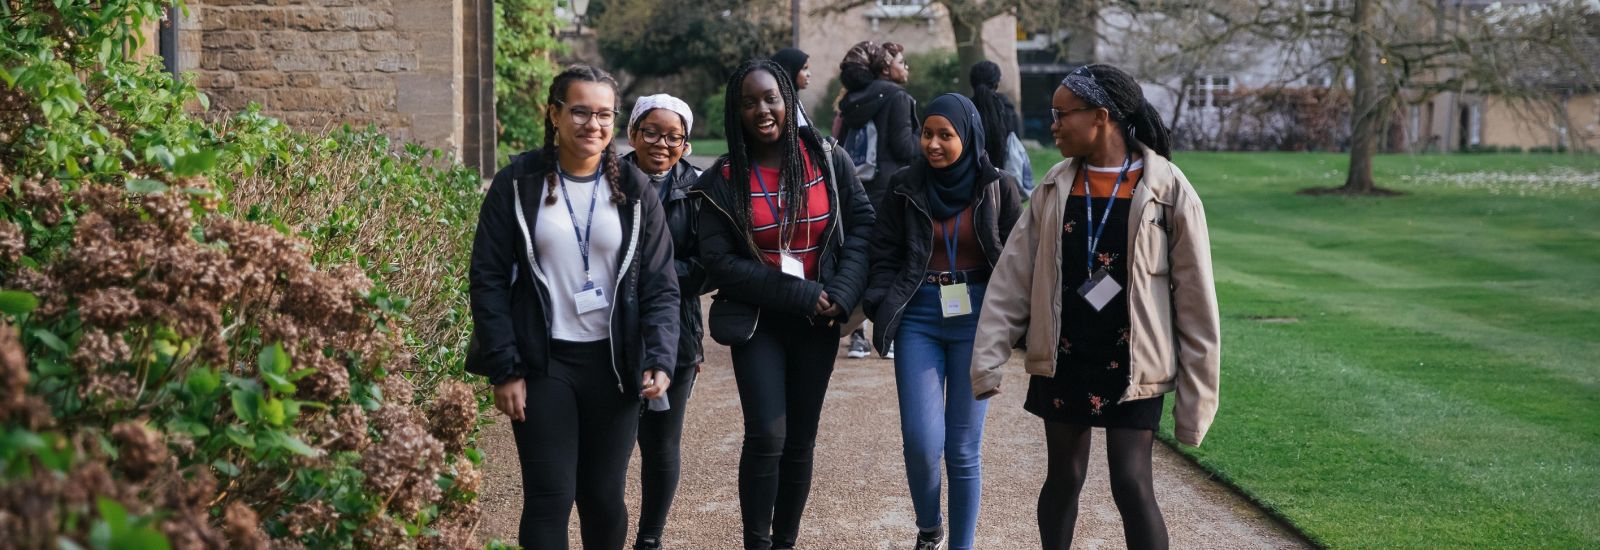 A group of female students wearing lanyards chat and smile while walking on a path in the Trinity College front quad during a school outreach visit.